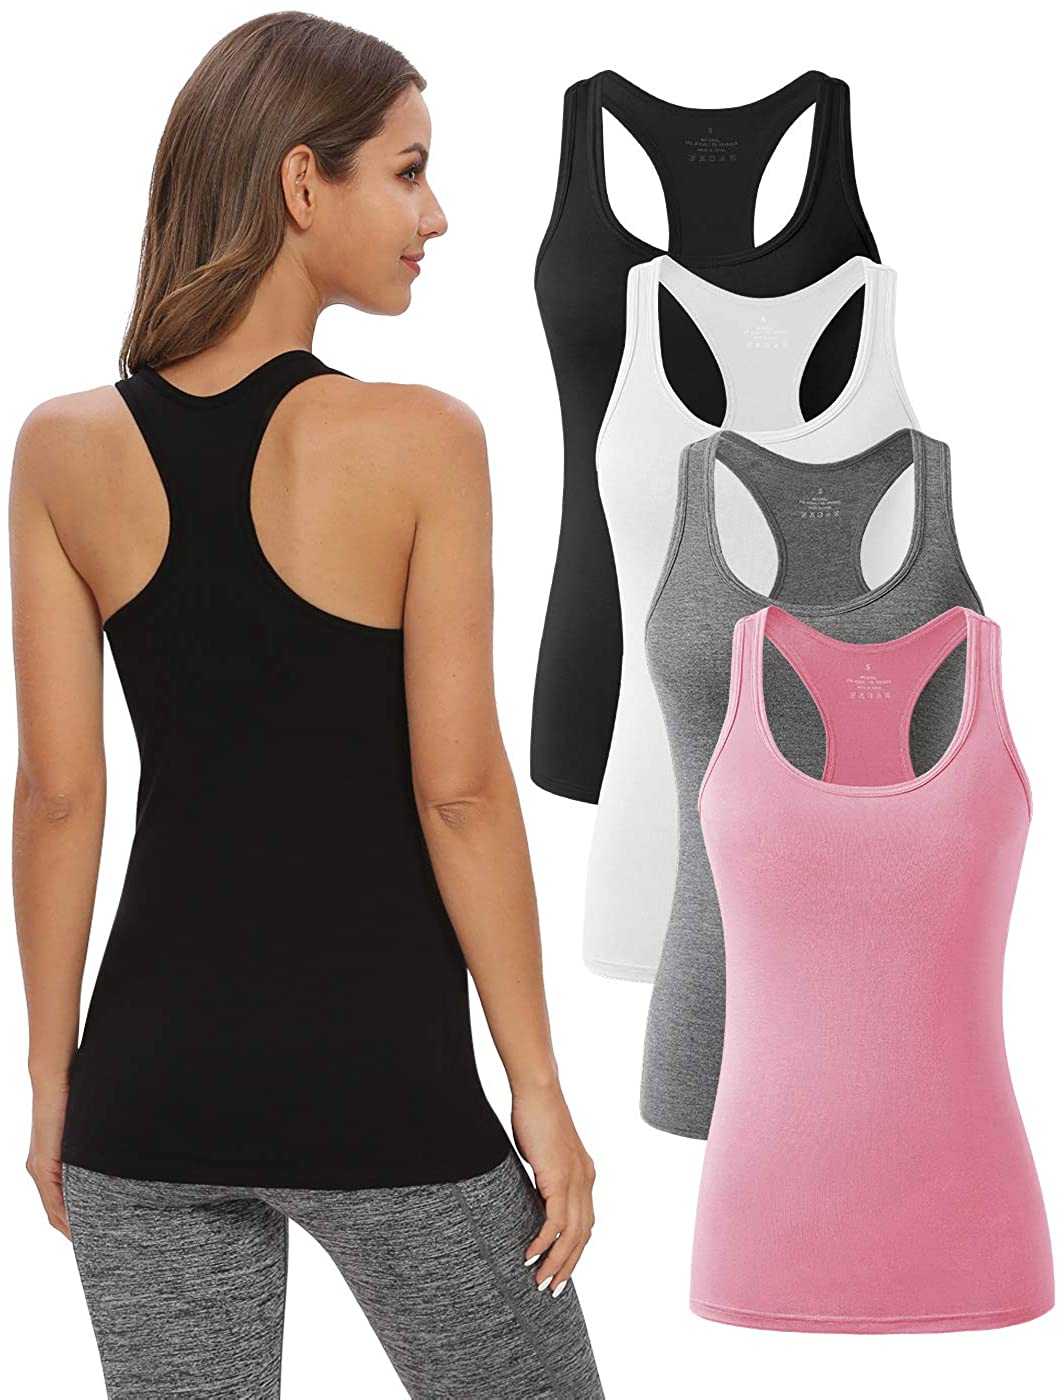 Star Vibe Basic Sports Crop Tank Tops for Women Cropped Racerback Tanks Workout Exercise Yoga Cotton Tops 4-5 Pieces 